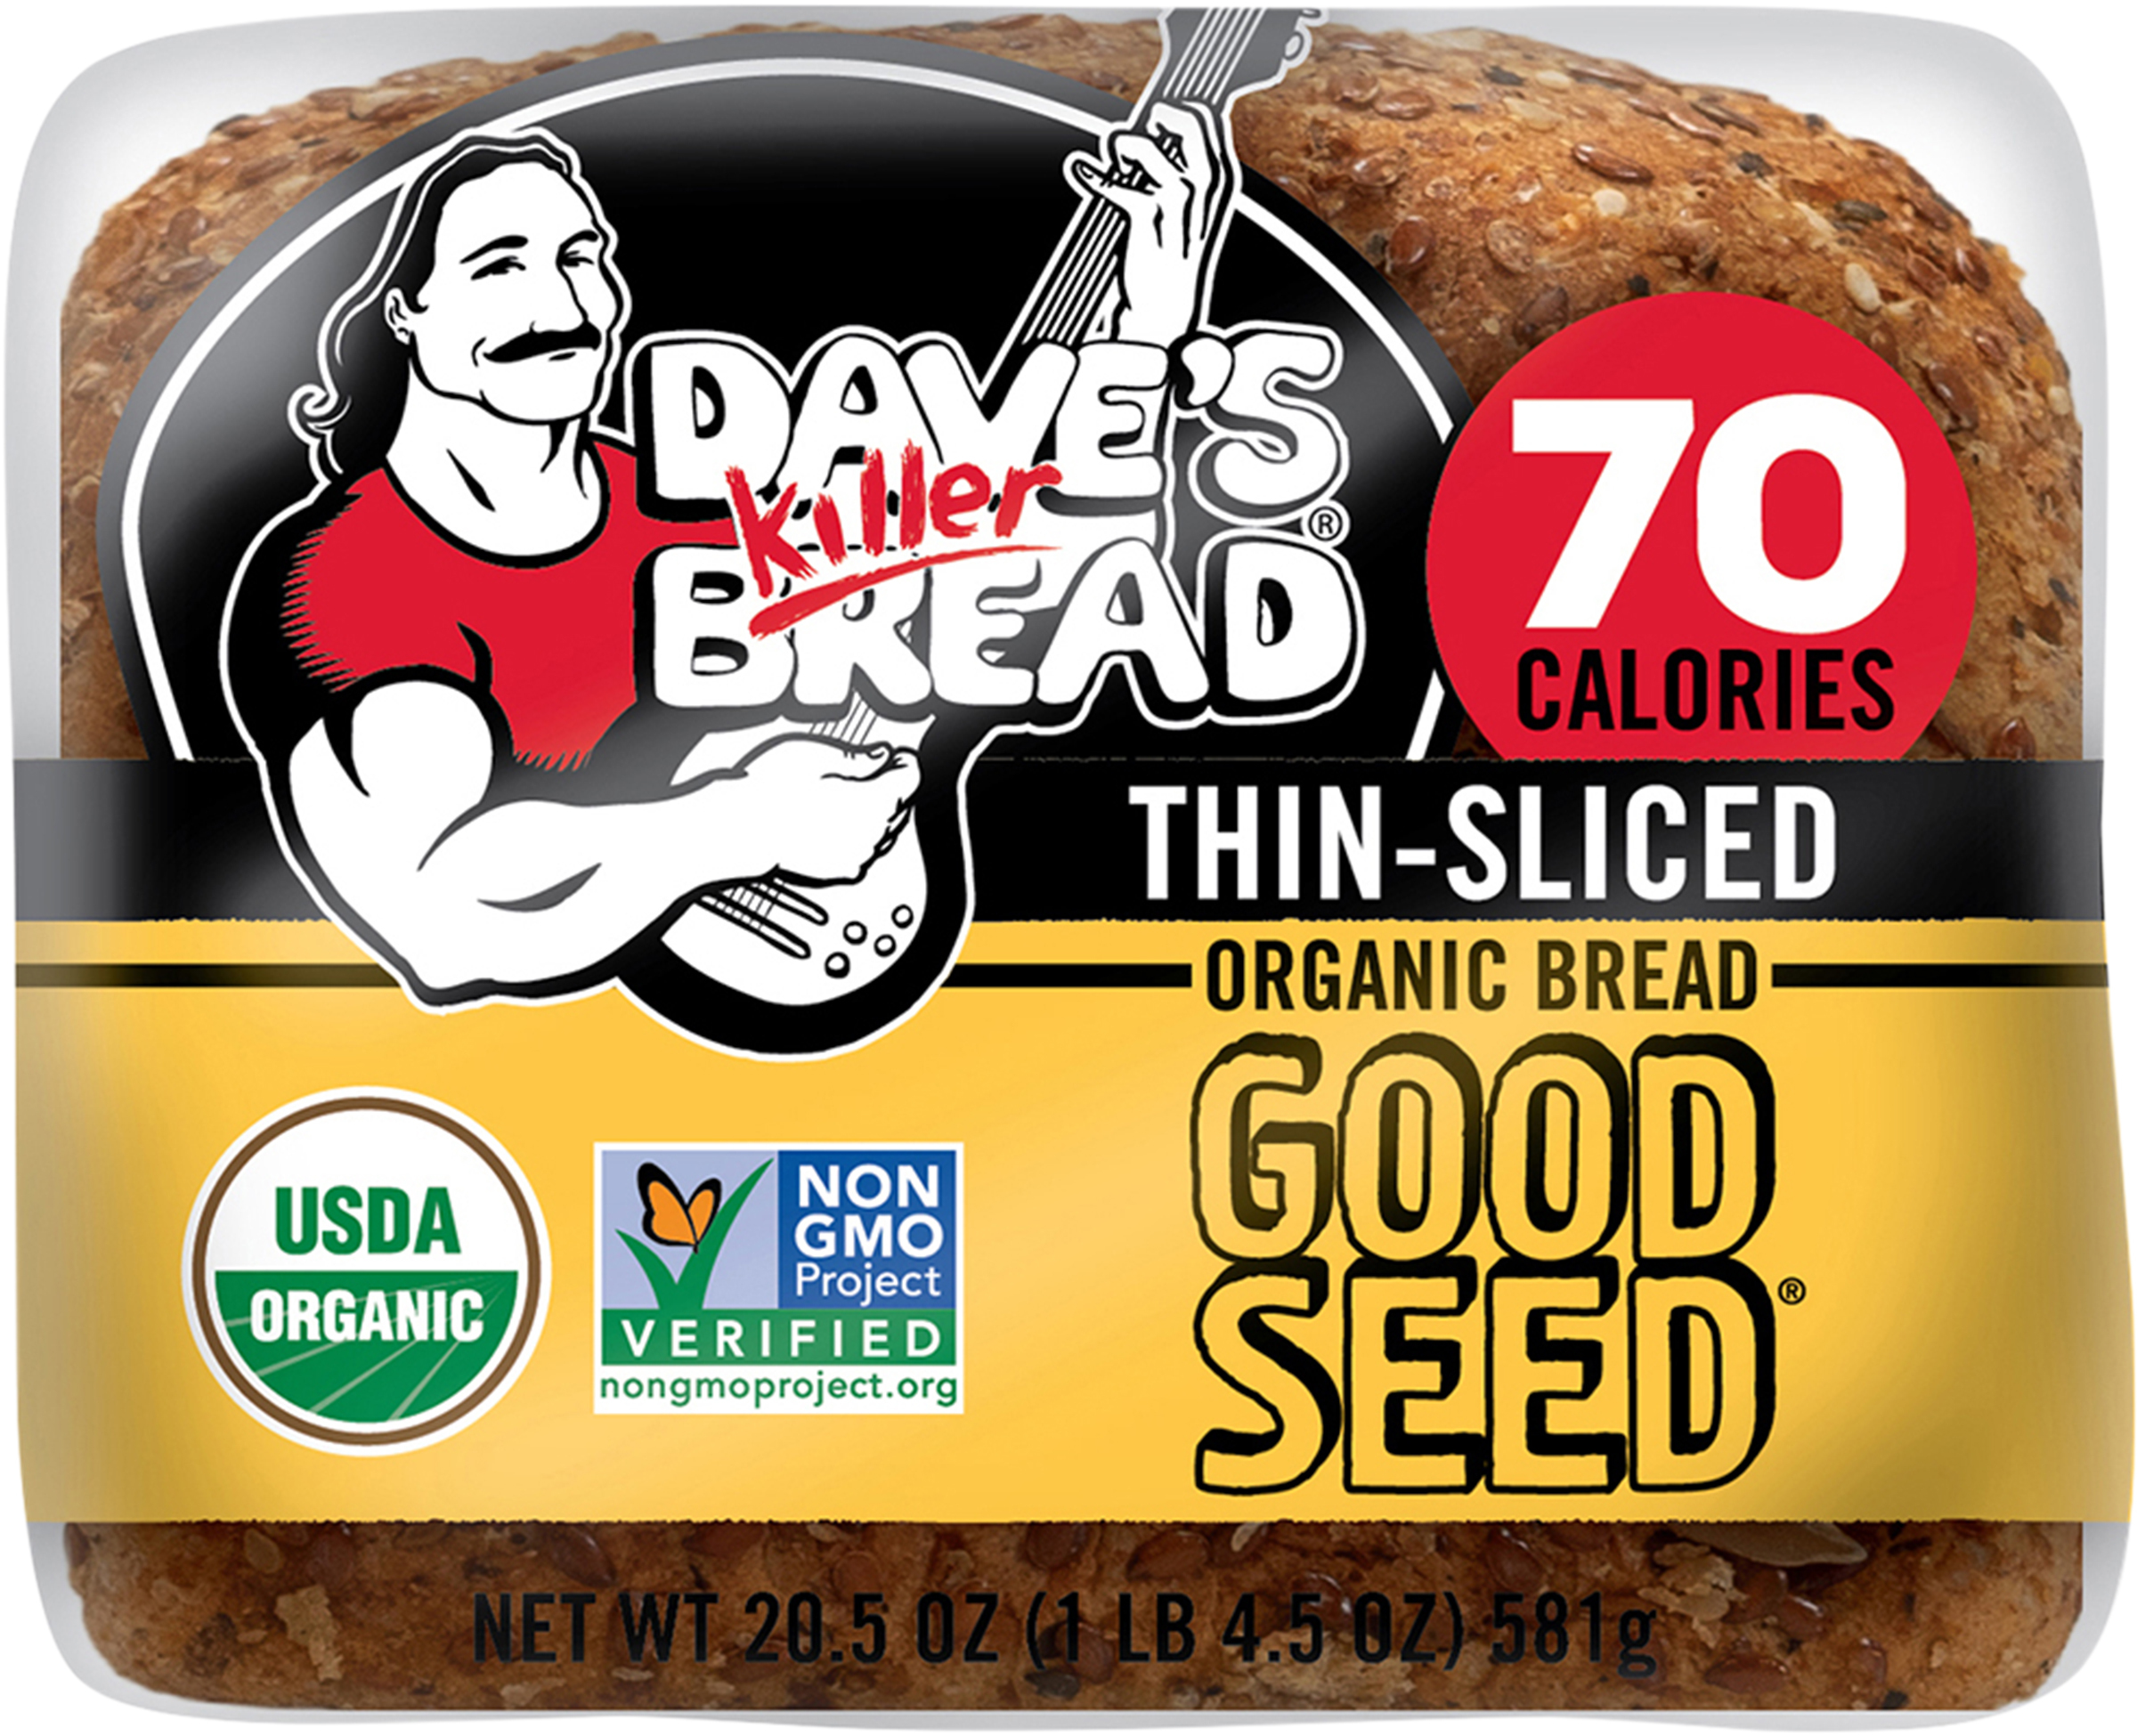 Dave's Killer Bread Good Seed Thin-Sliced Organic Bread Loaf, 20.5 oz - image 15 of 17